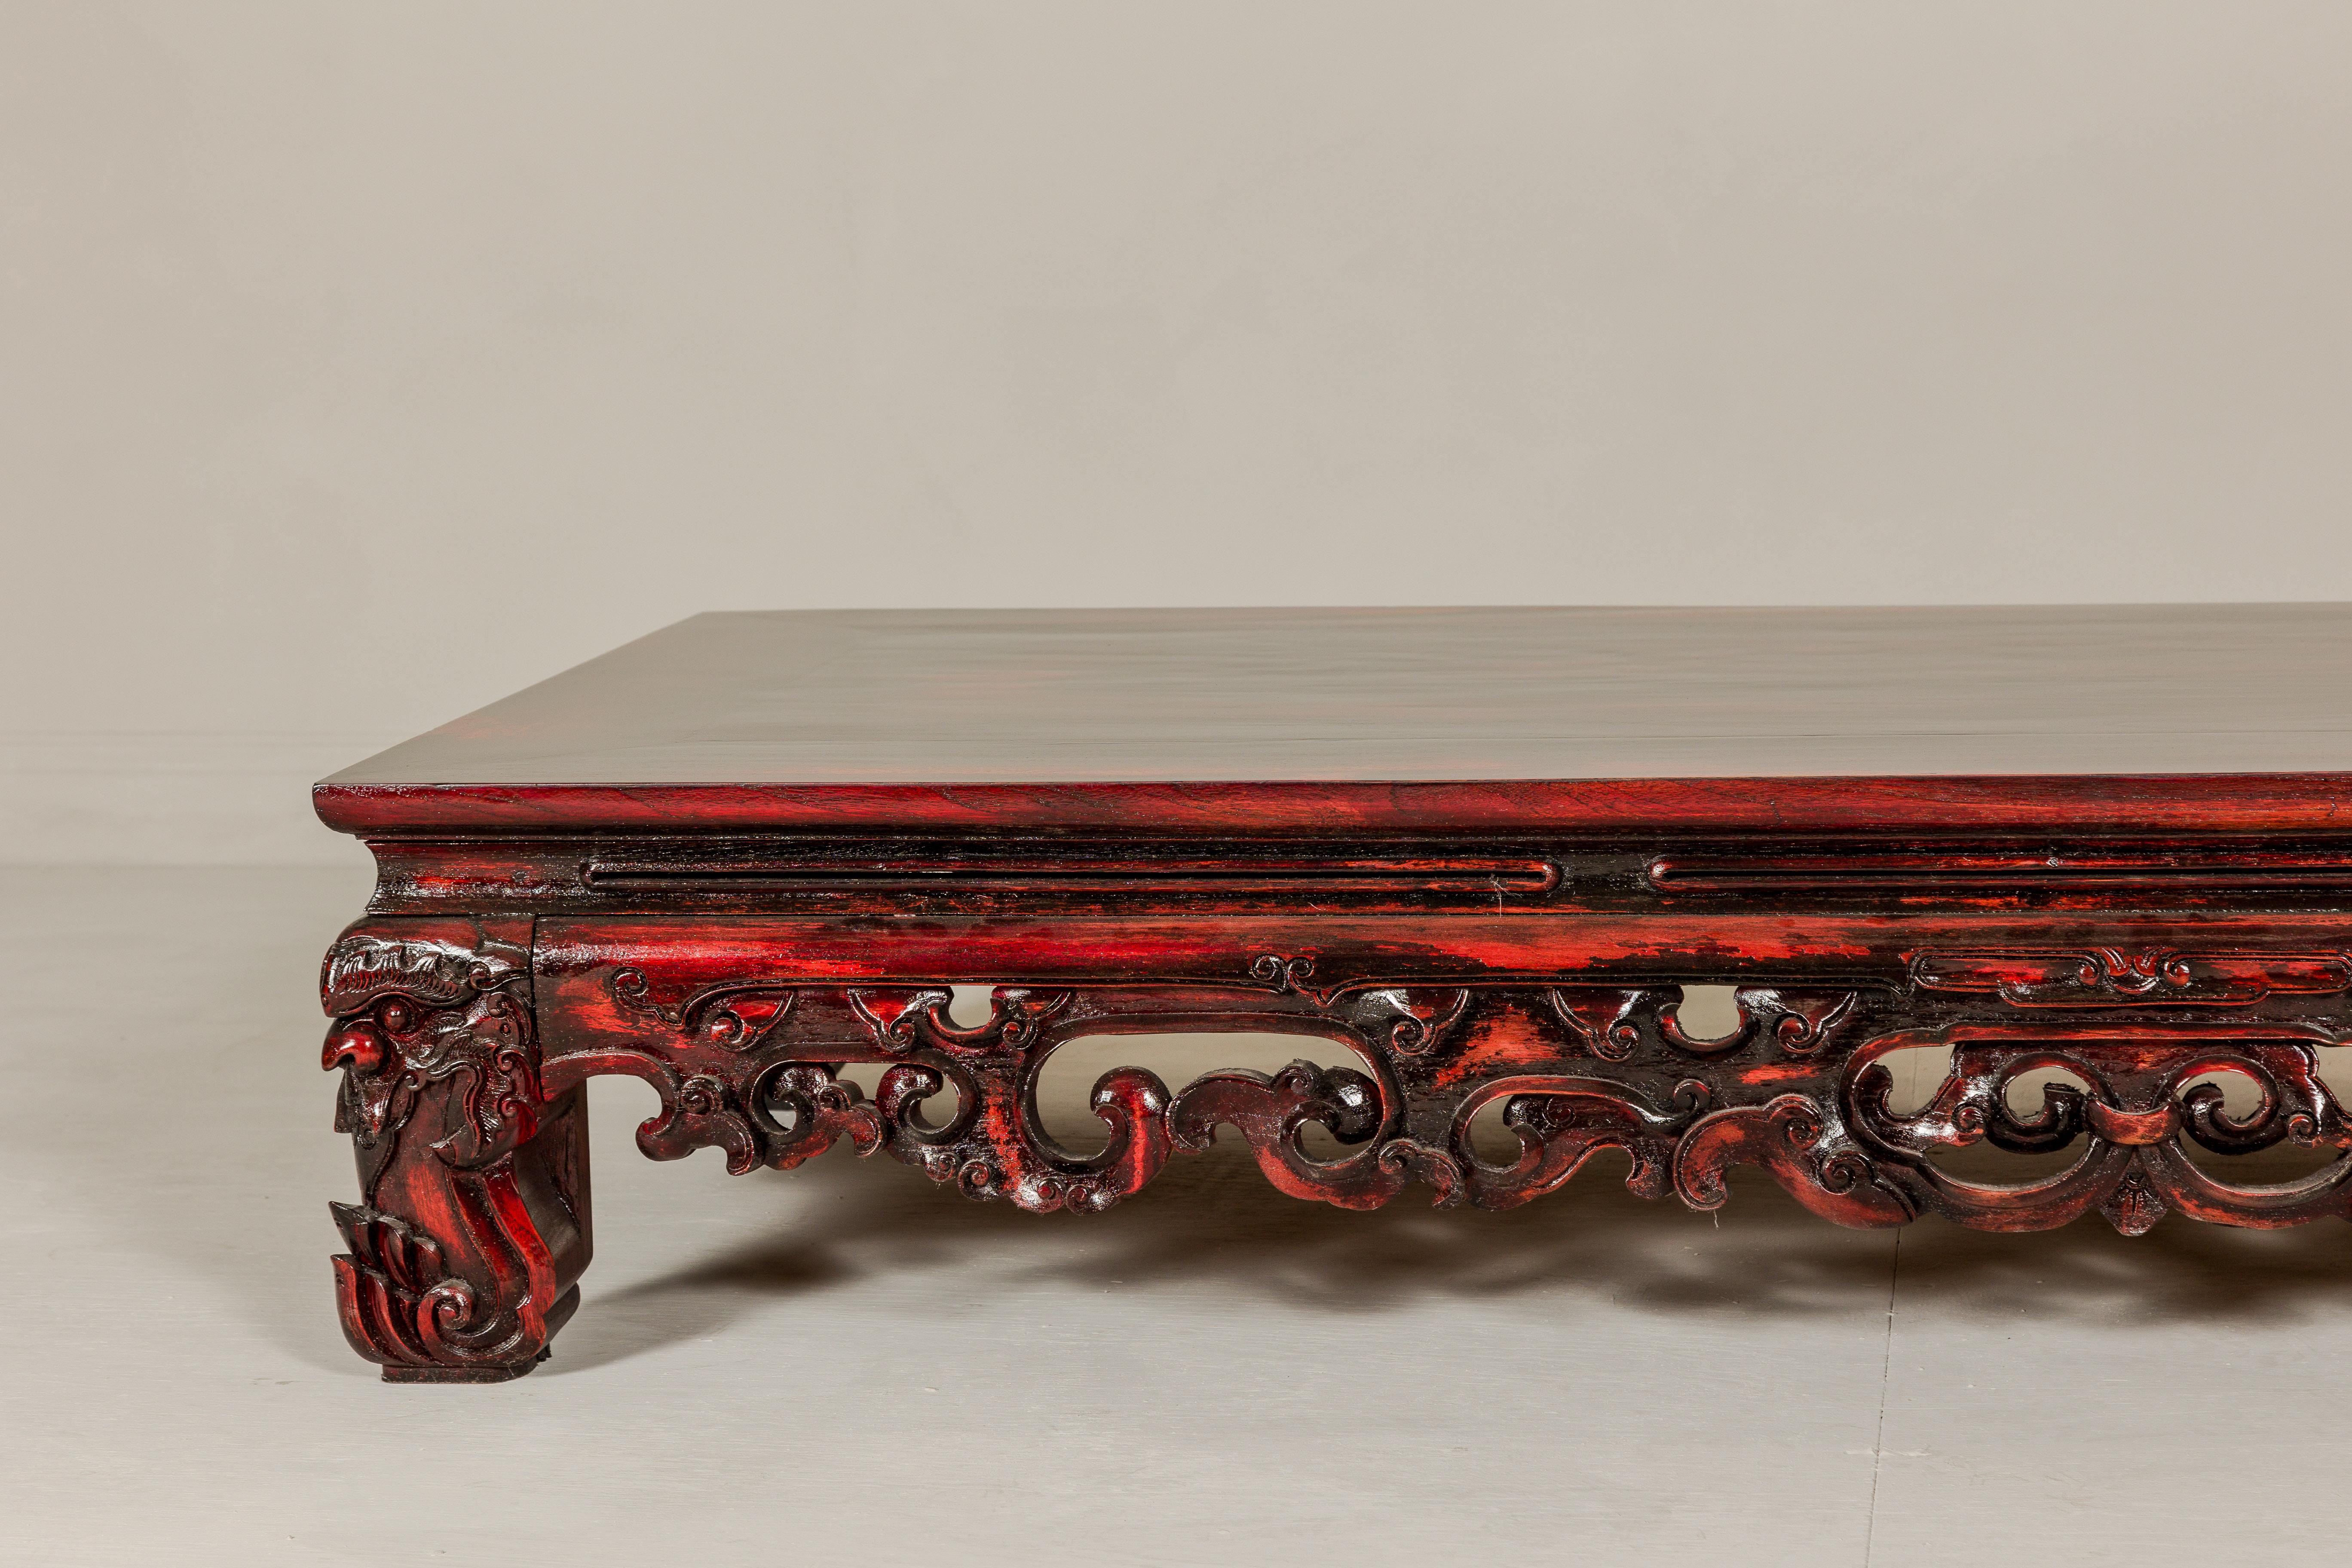 Qing Dynasty Low Kang Coffee Table with Reddish Brown Finish and Carved Décor In Good Condition For Sale In Yonkers, NY